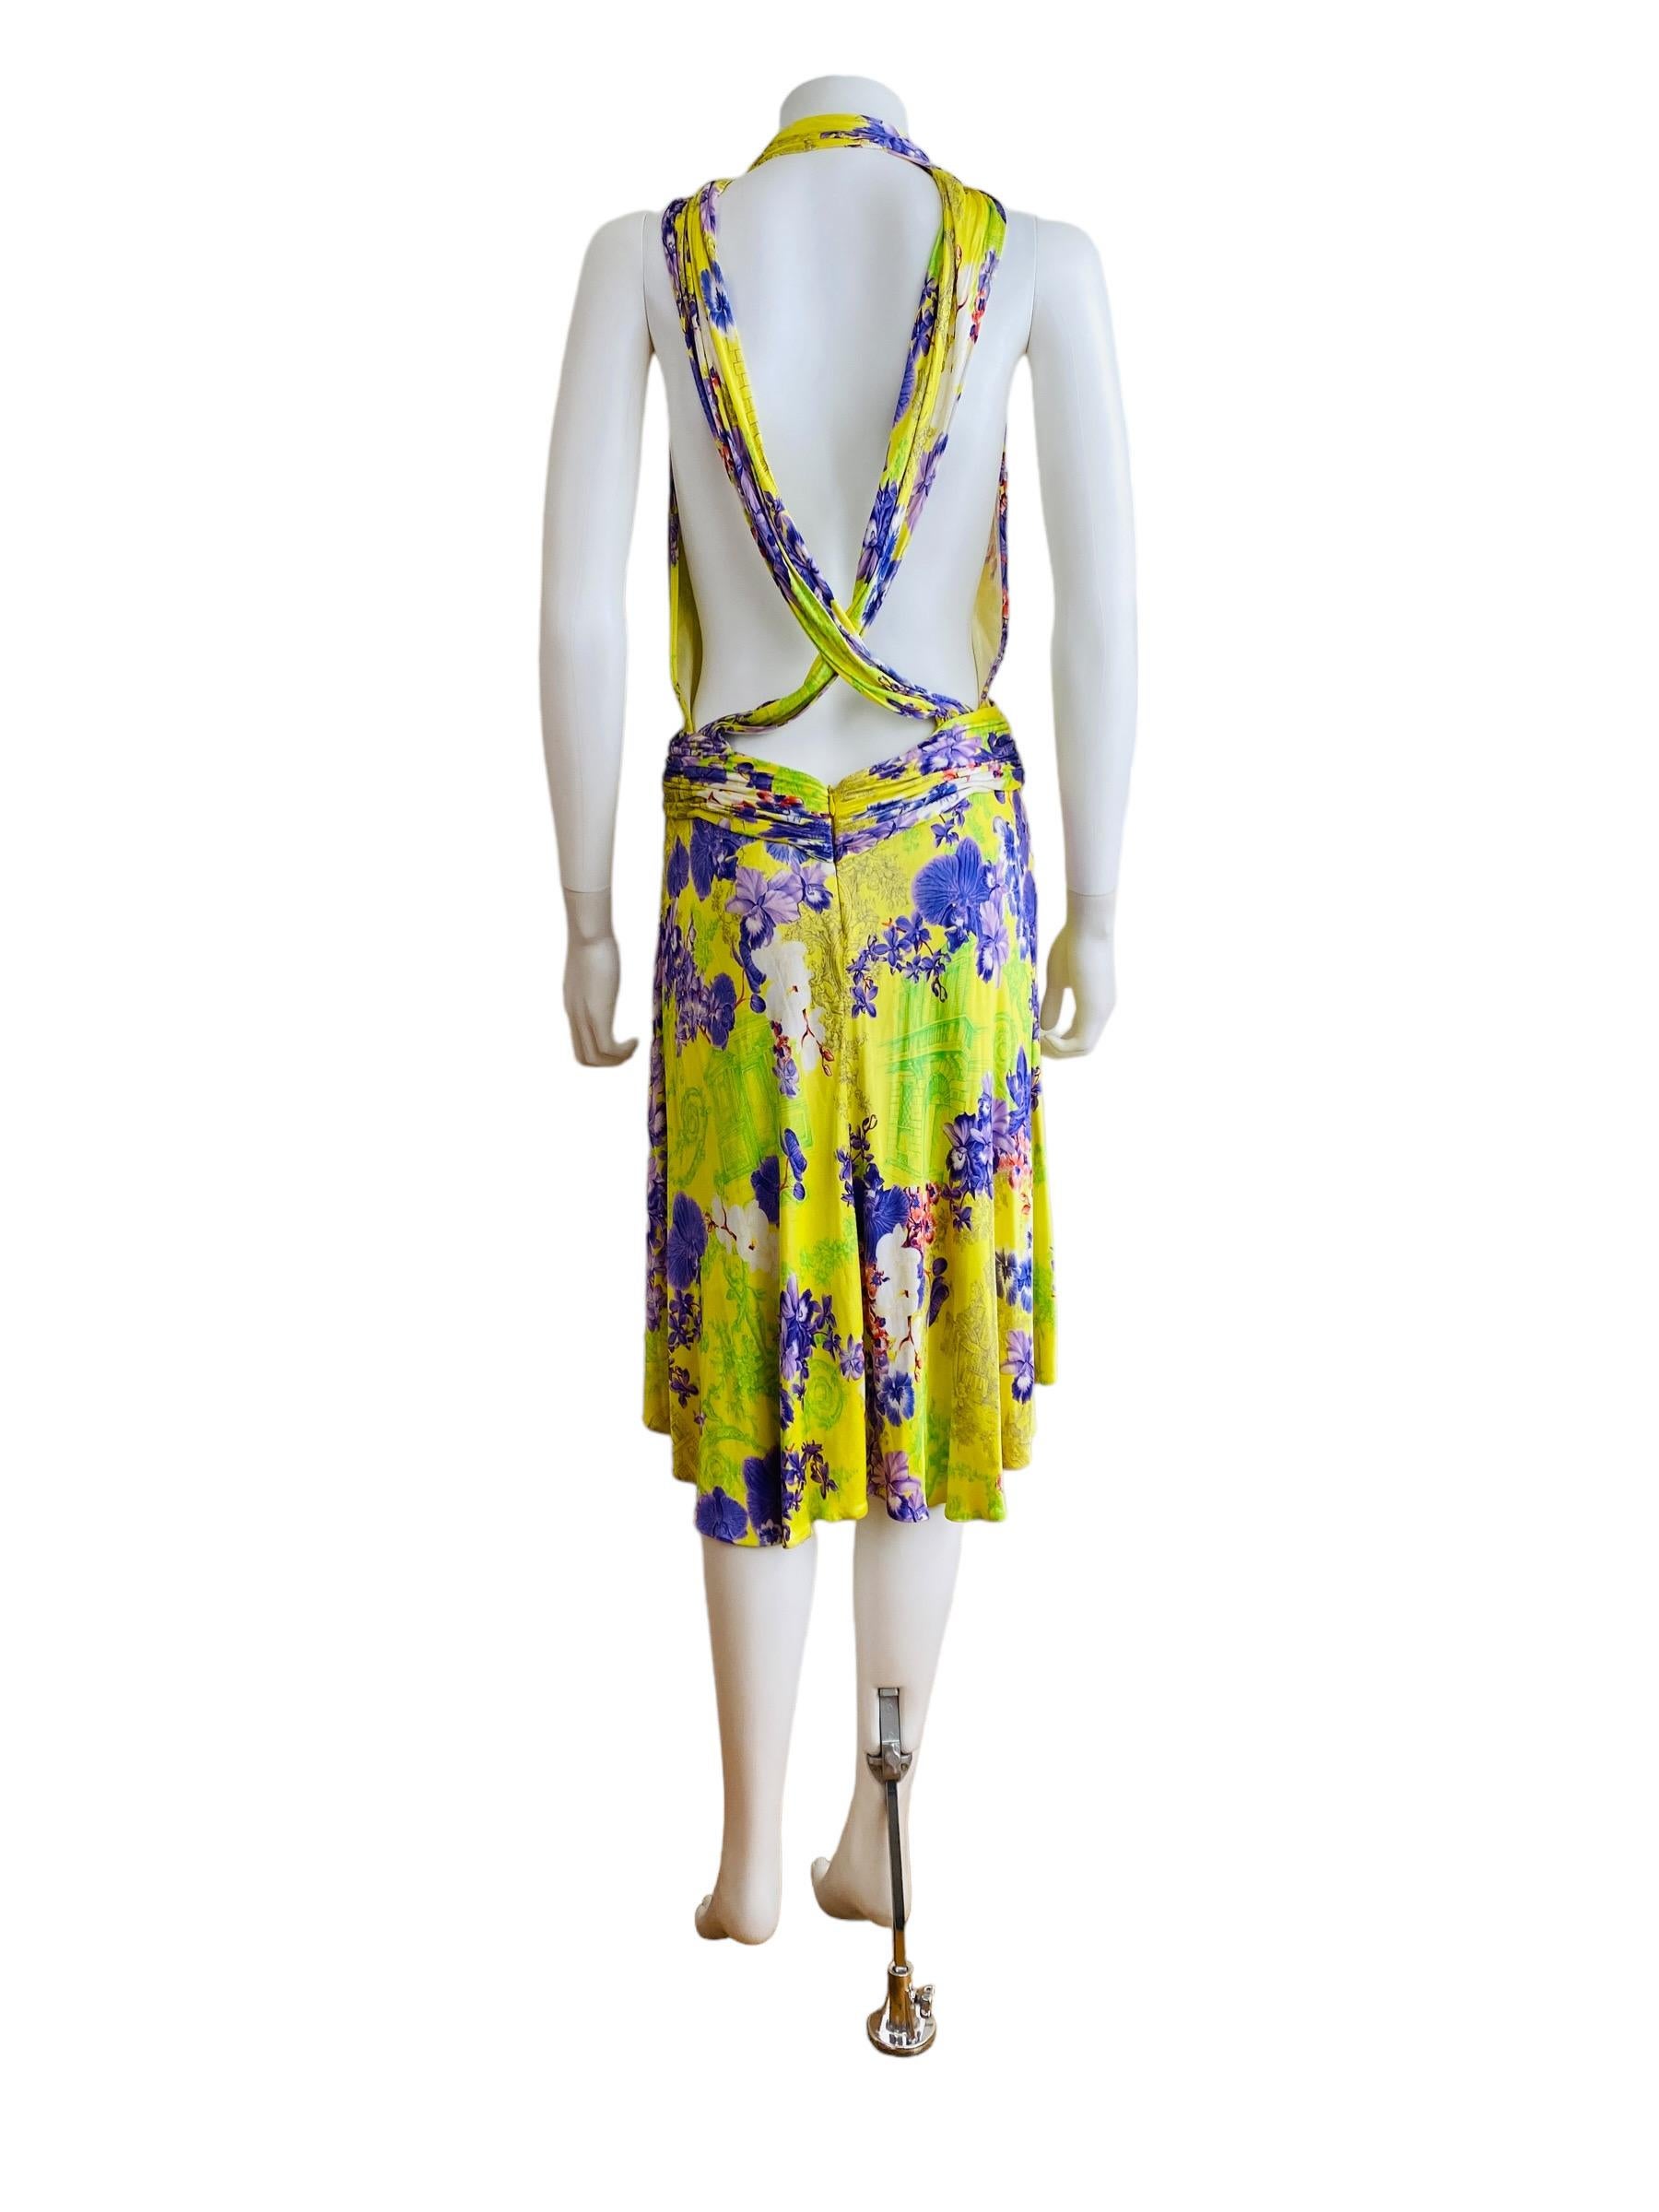 Vintage S/S 2004 Versace Dress Bright Yellow + Purple Orchid Floral Runway For Sale 8